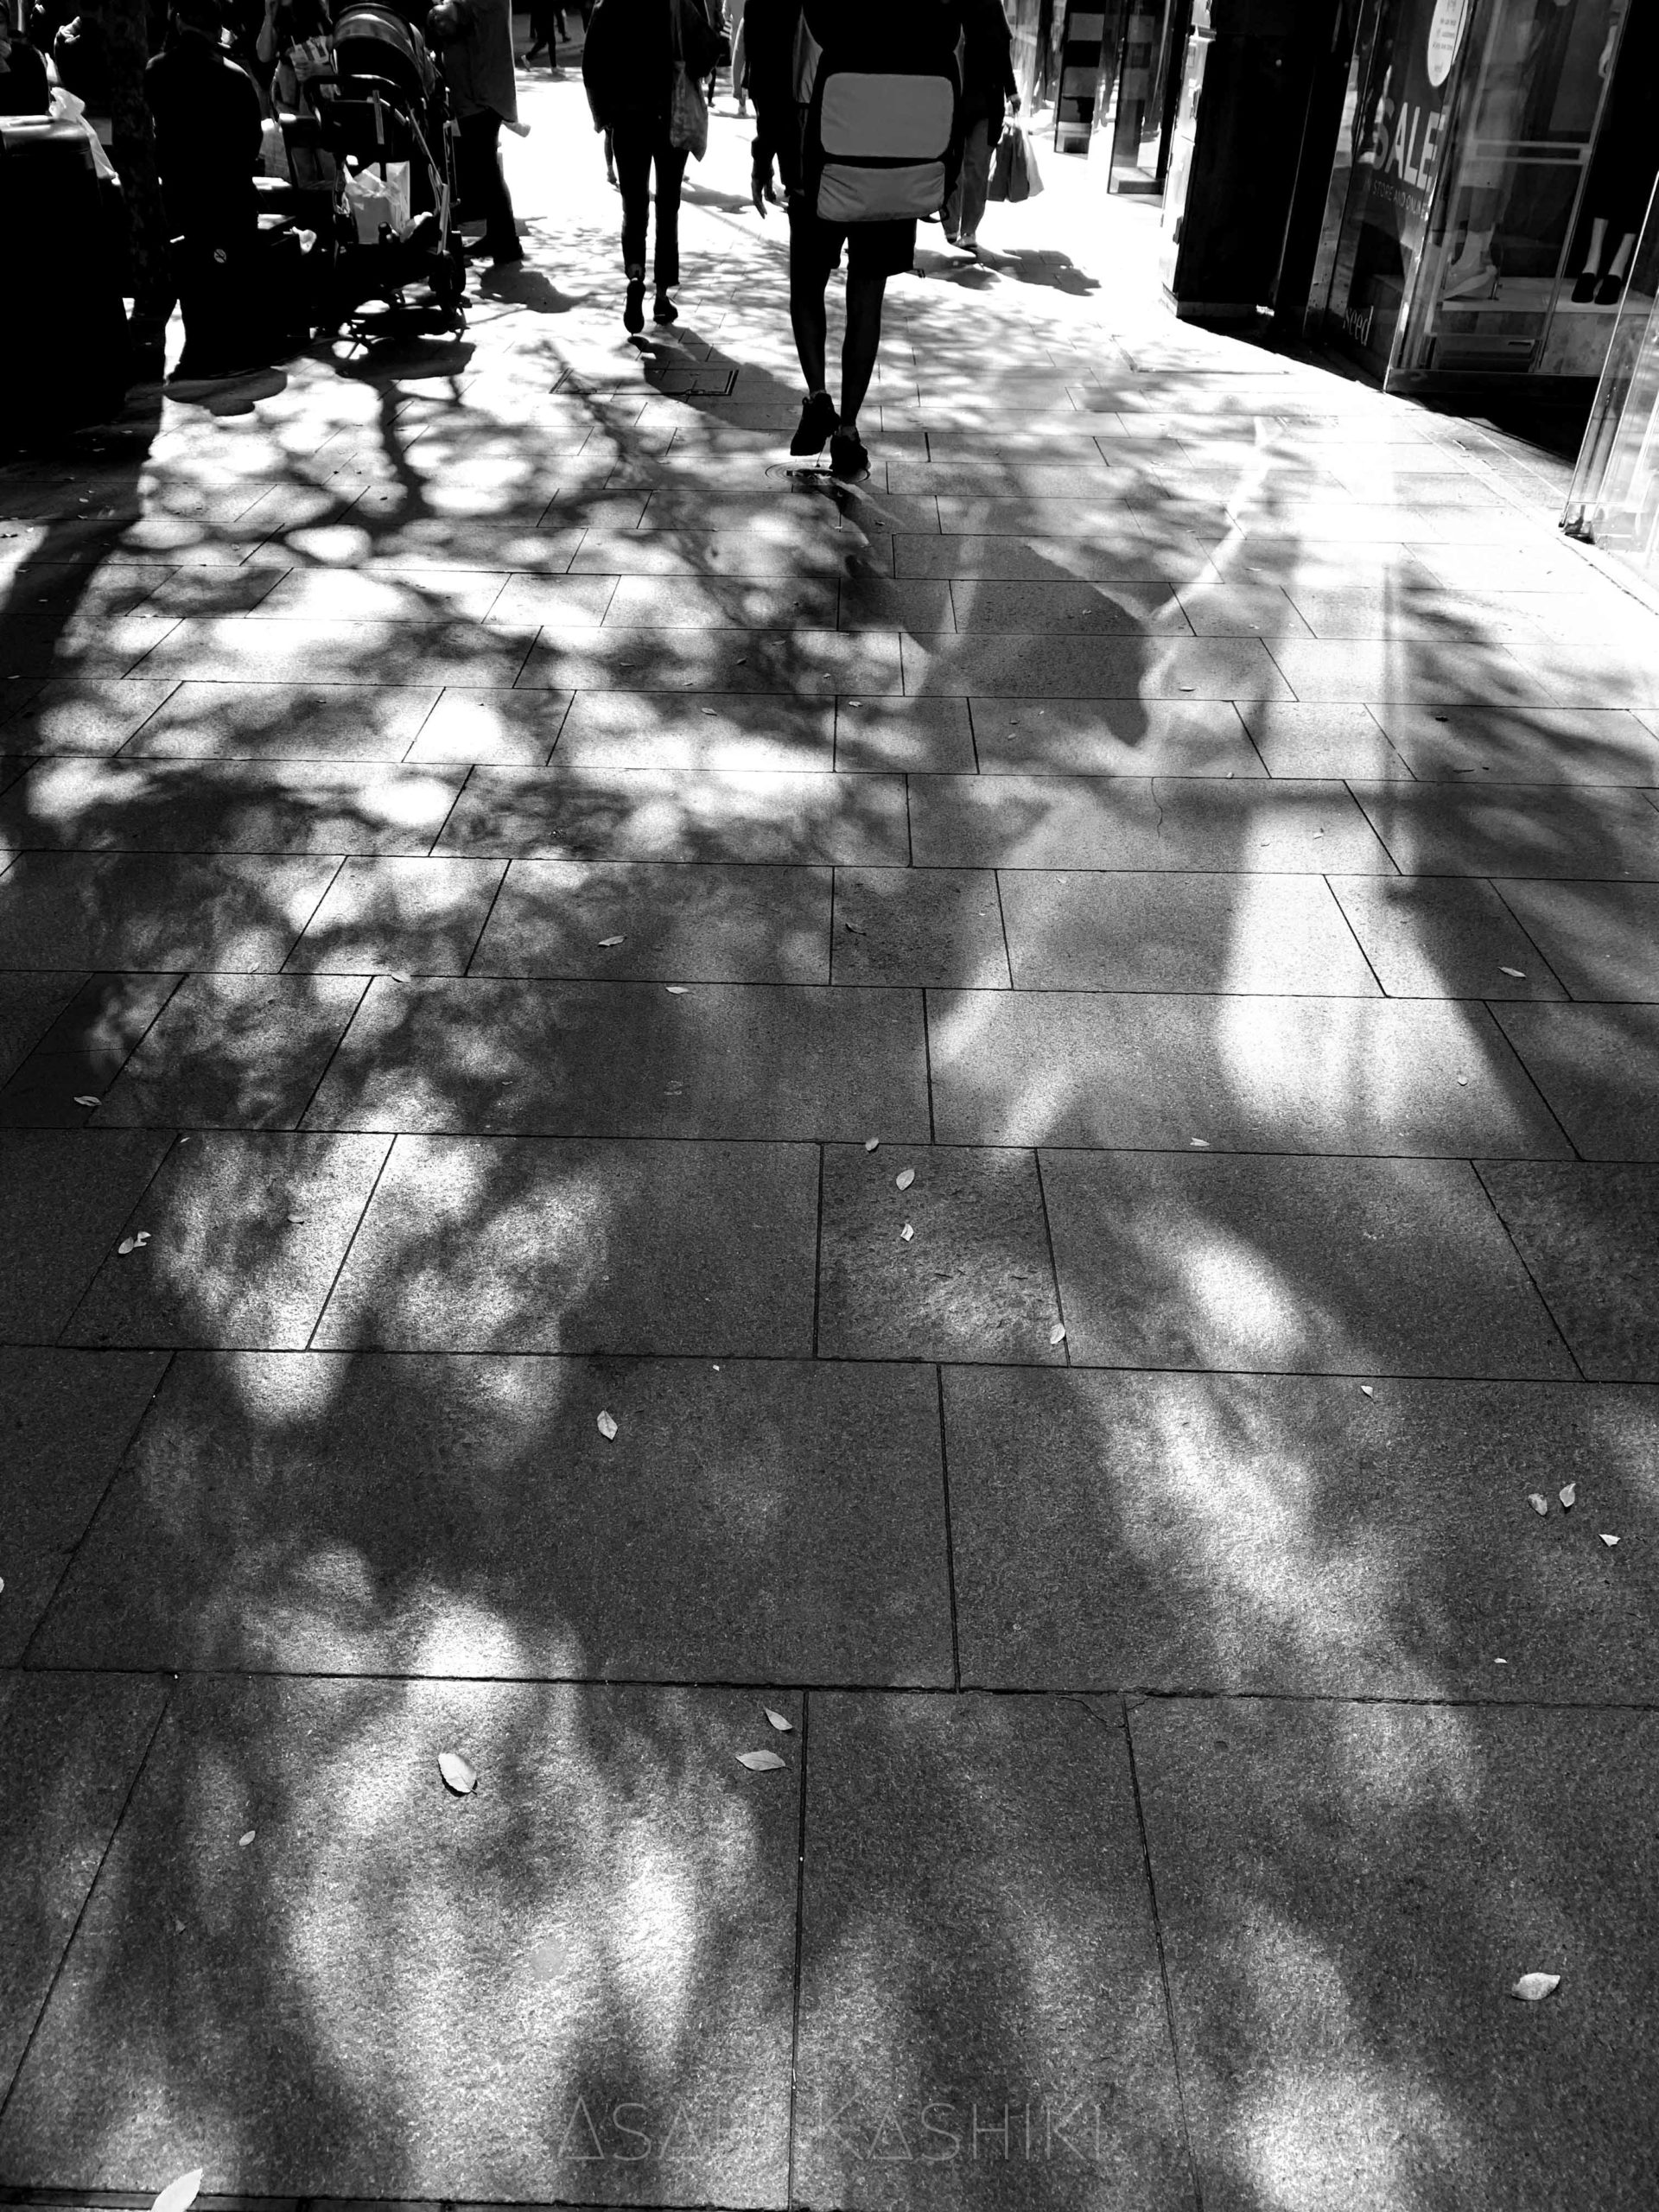 the shadow of trees broading on the shopping street.